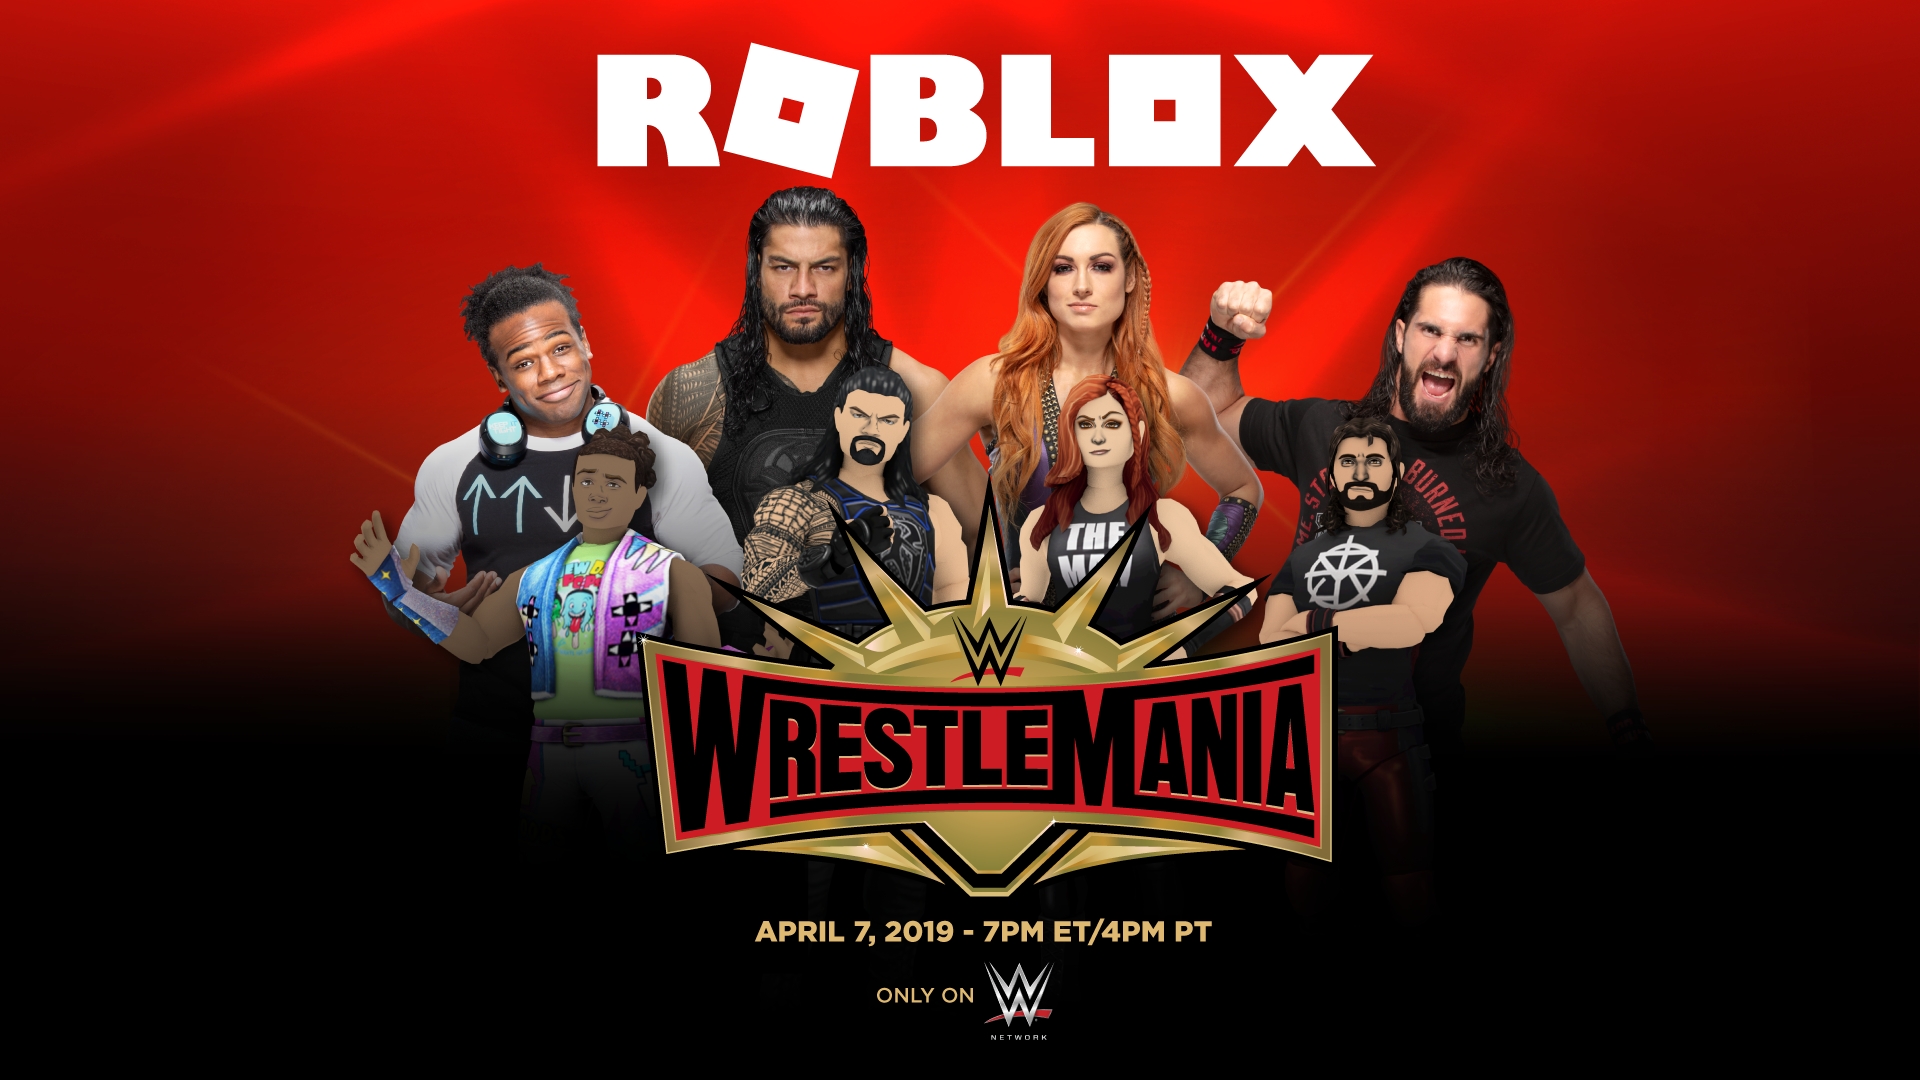 Roblox And Wwe Partner To Celebrate Wrestlemania Business Wire - 